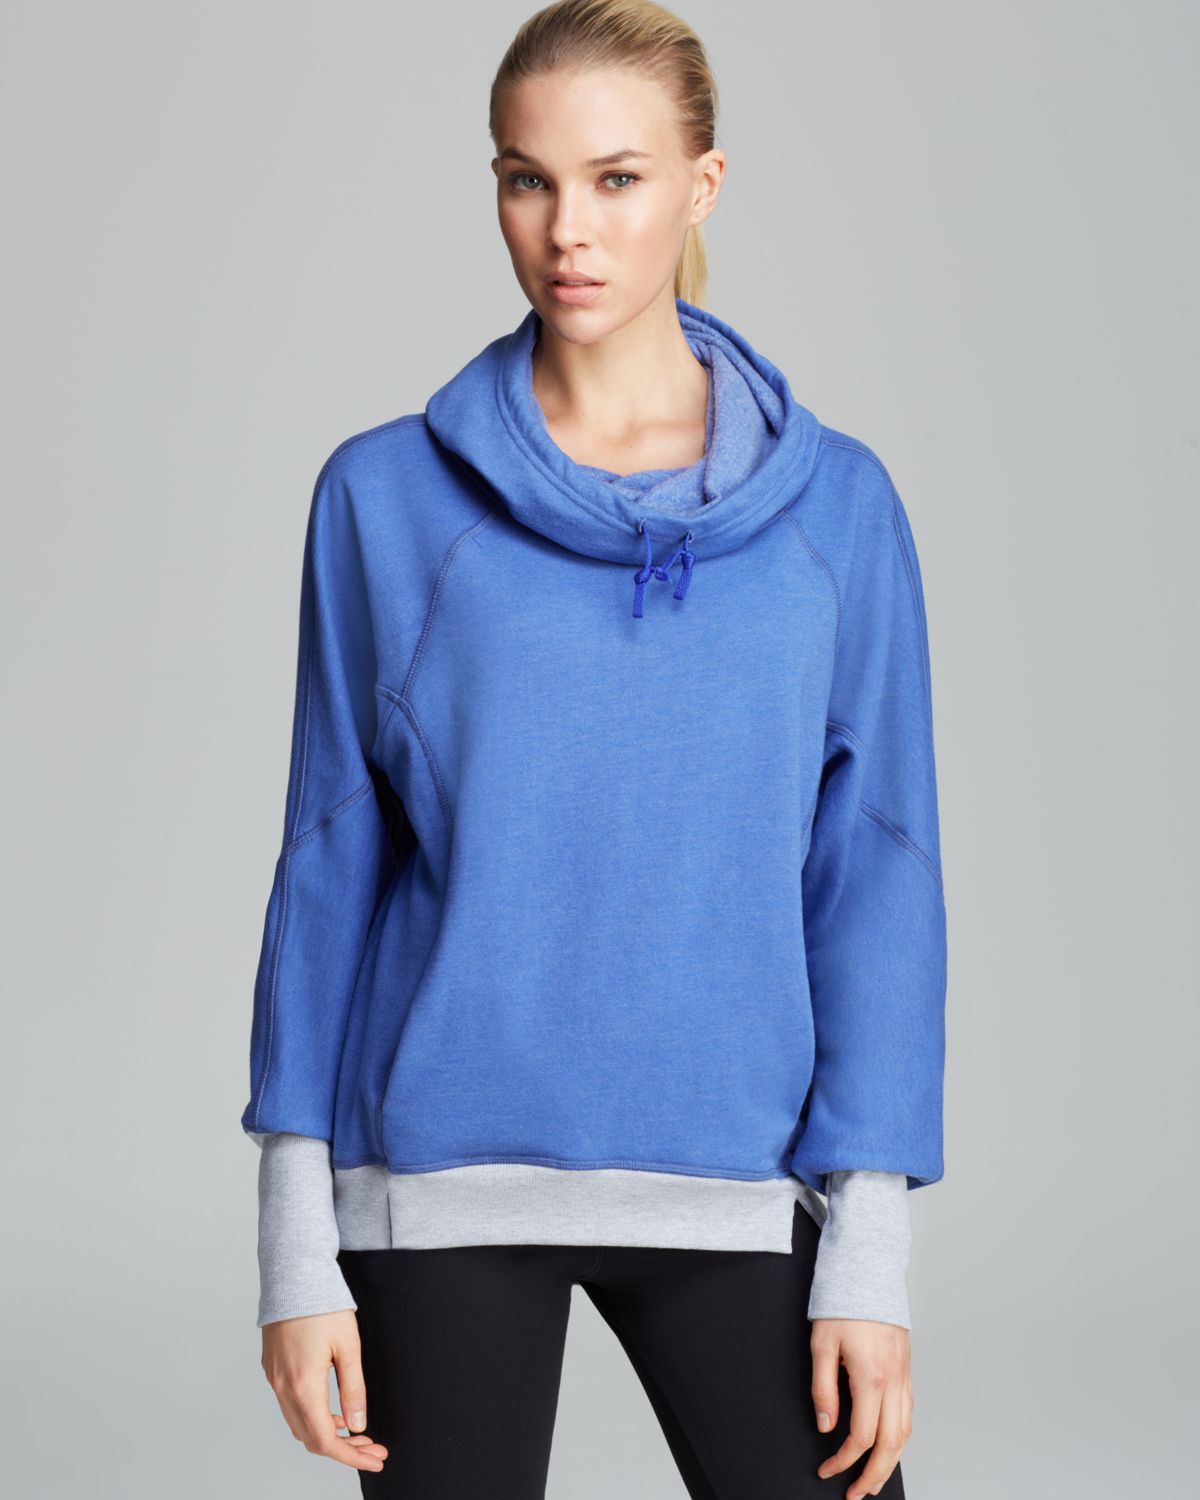 Lyst - C&C California Hoodie To Fro Active in Blue